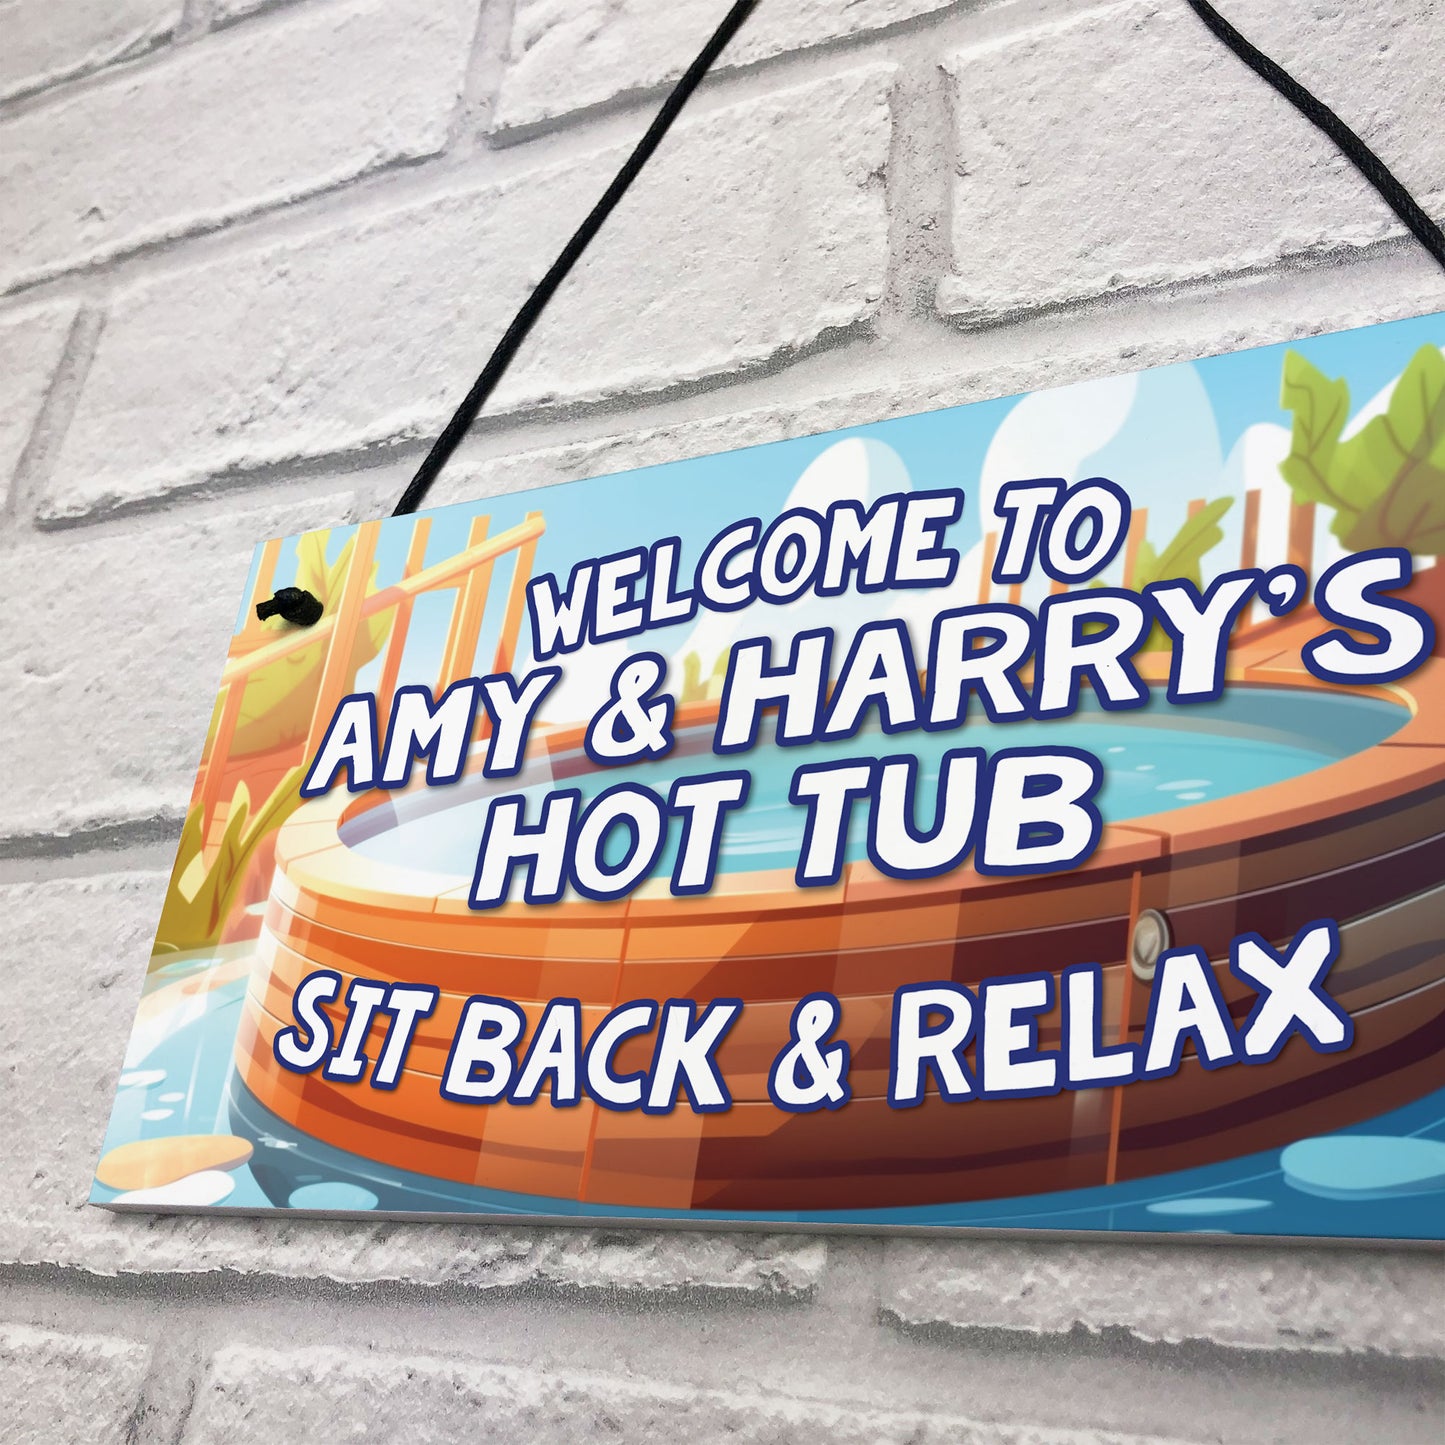 Personalised Hot Tub Signs And Plaques For Garden Summerhouse